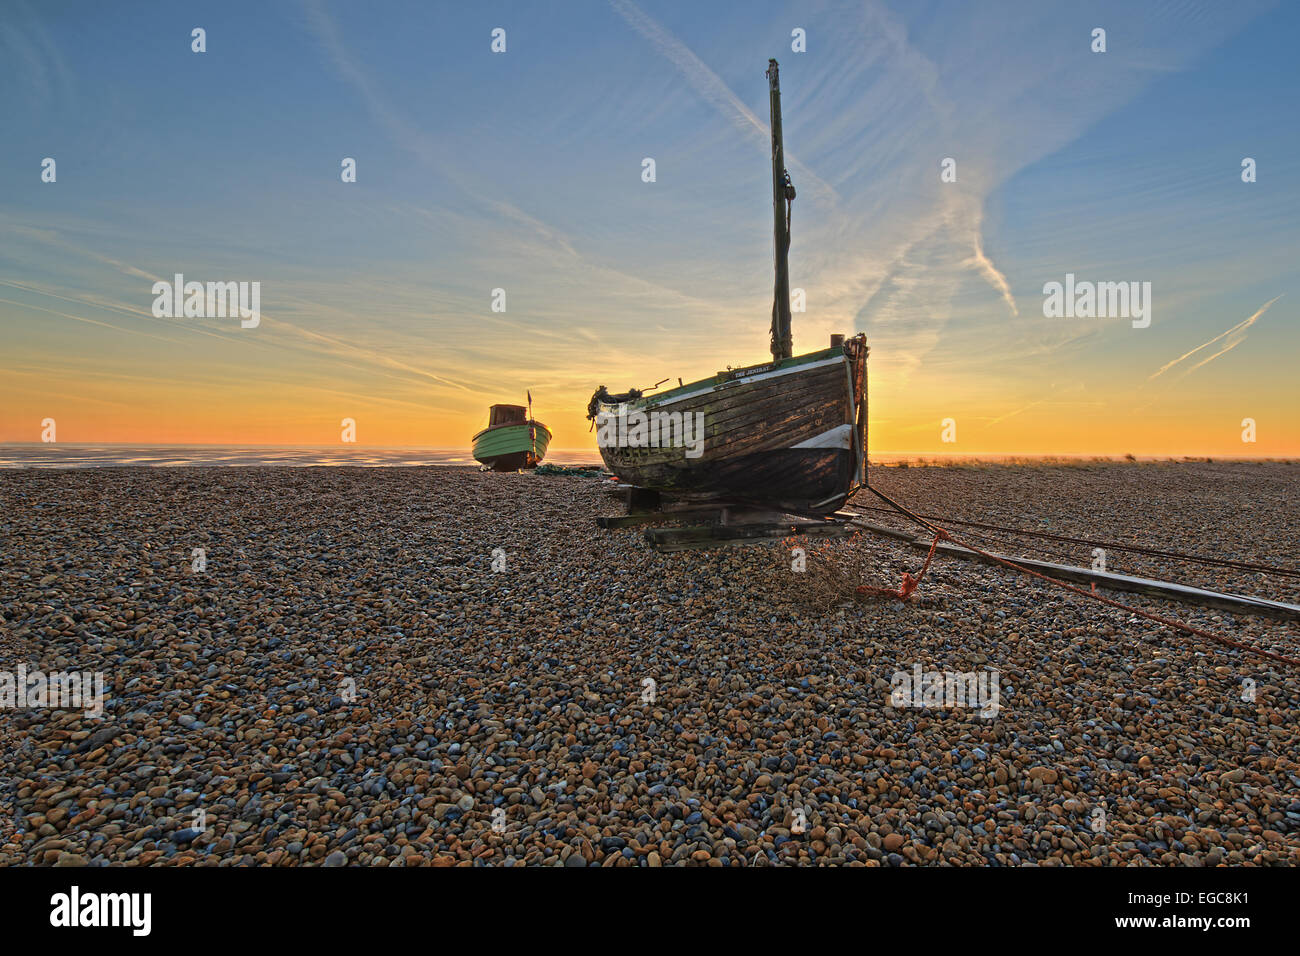 An image of an abandoned and wrecked boat on a shingle beach Stock Photo